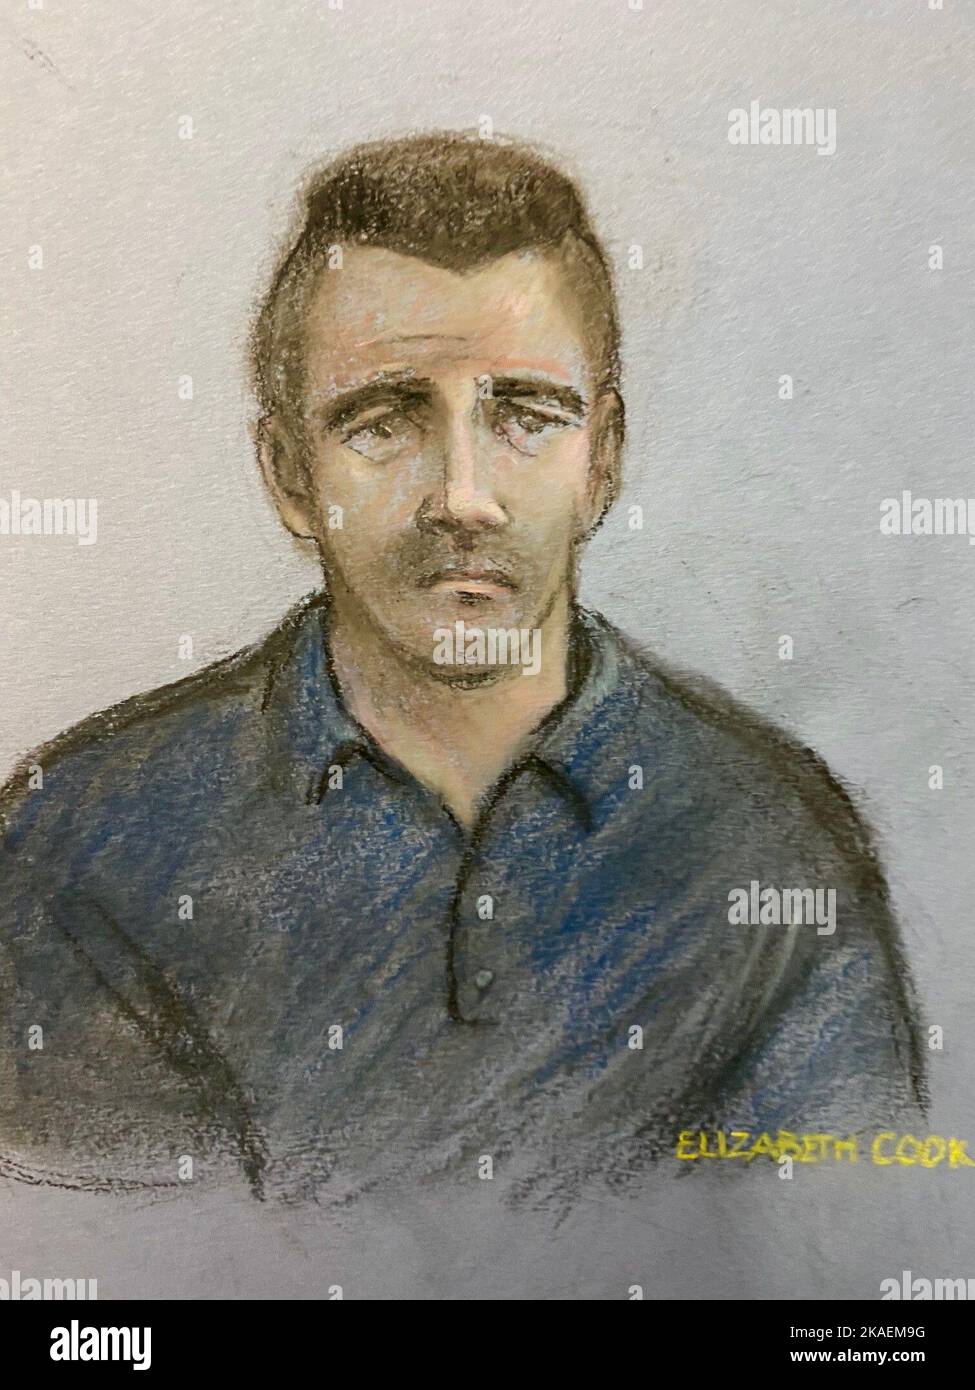 Court artist drawing by Elizabeth Cook of Ross McCullum, 30, of Windsor Close in Coalville, Leicestershire, during his trial at Leicester Crown Court, where he is accused of the murder of 23-year-old Megan Newborough. Mr McCullum has admitted the manslaughter of Ms Newborough but denies murdering her in the living room of his parents' house in Leicestershire. Her body was discovered in undergrowth in Charley Road, near Woodhouse Eaves, Leicestershire in the early hours of Sunday August 8 last year. Picture date: Wednesday November 2, 2022. Stock Photo